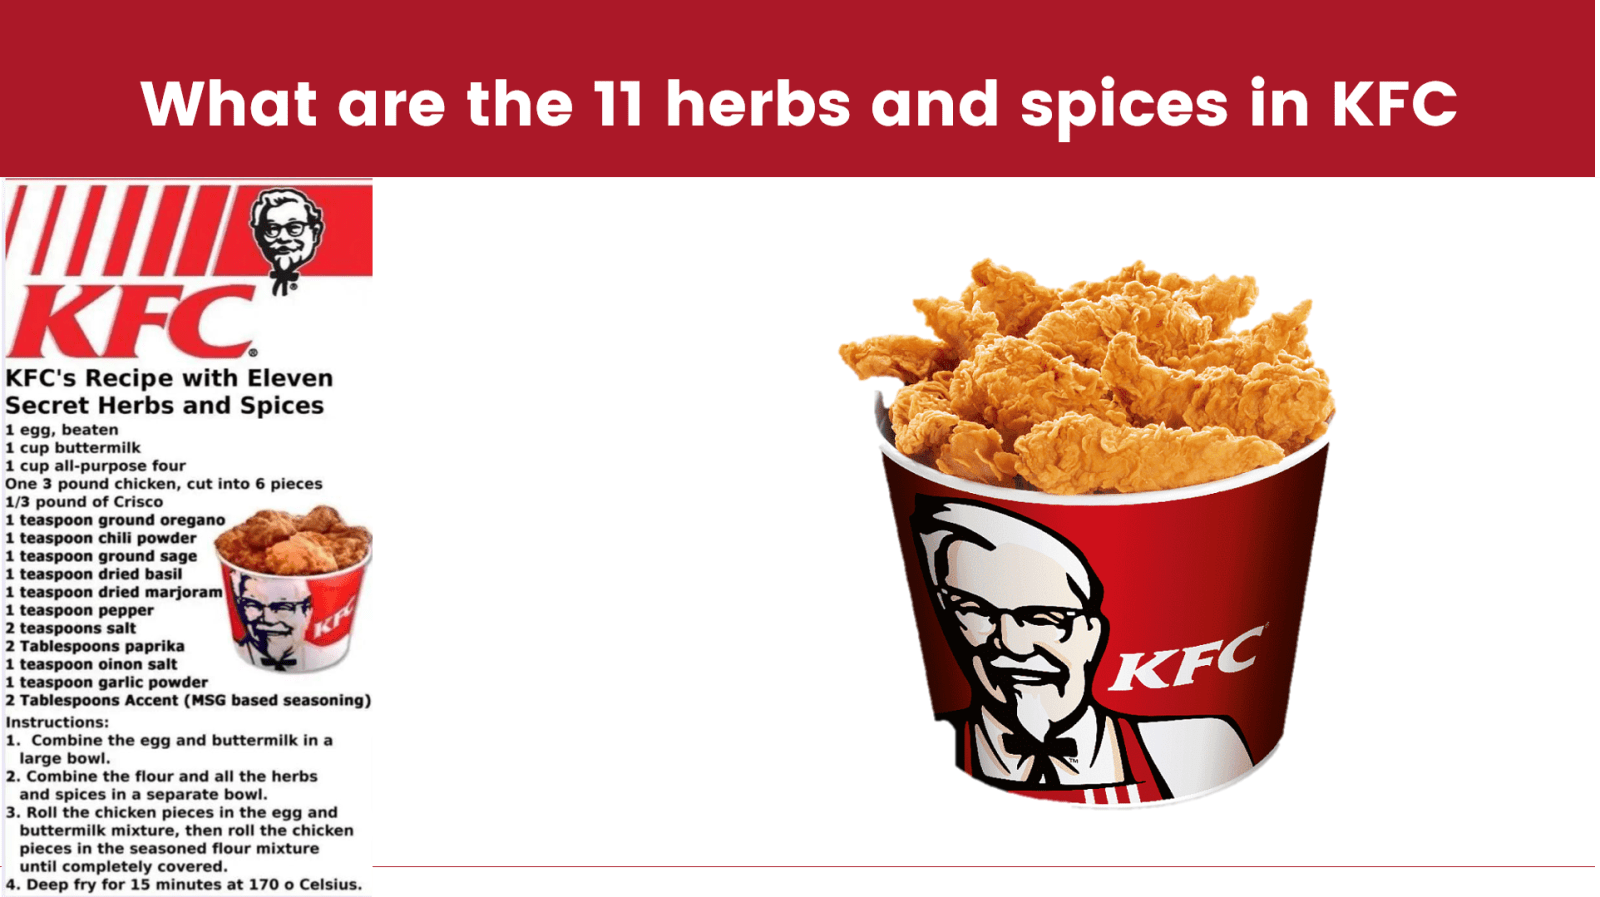 What are the 11 herbs and spices in KFC